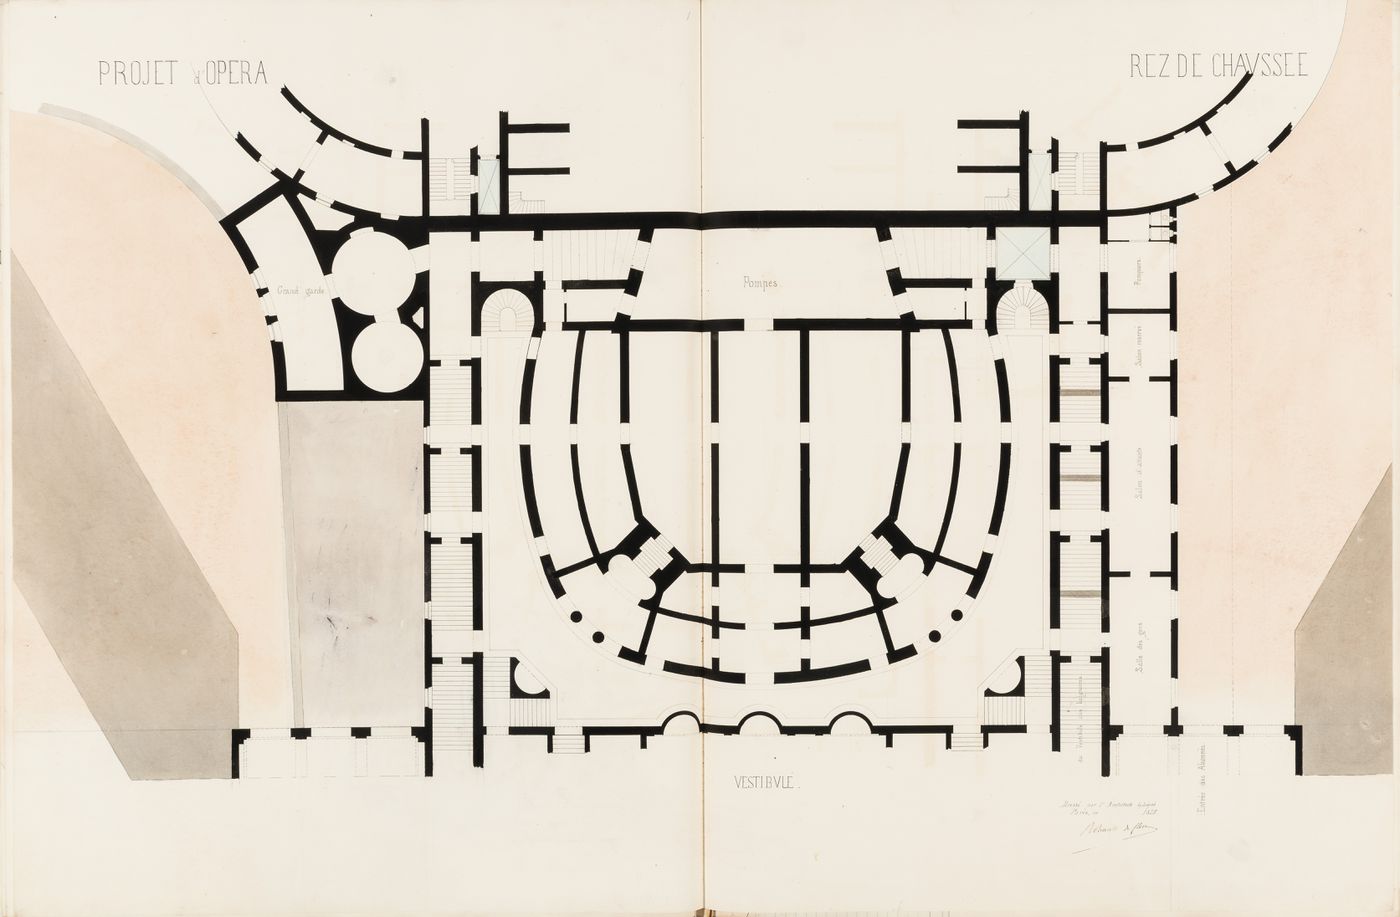 Project for an opera house for the Théâtre impérial de l'opéra: Ground floor plan showing the auditorium